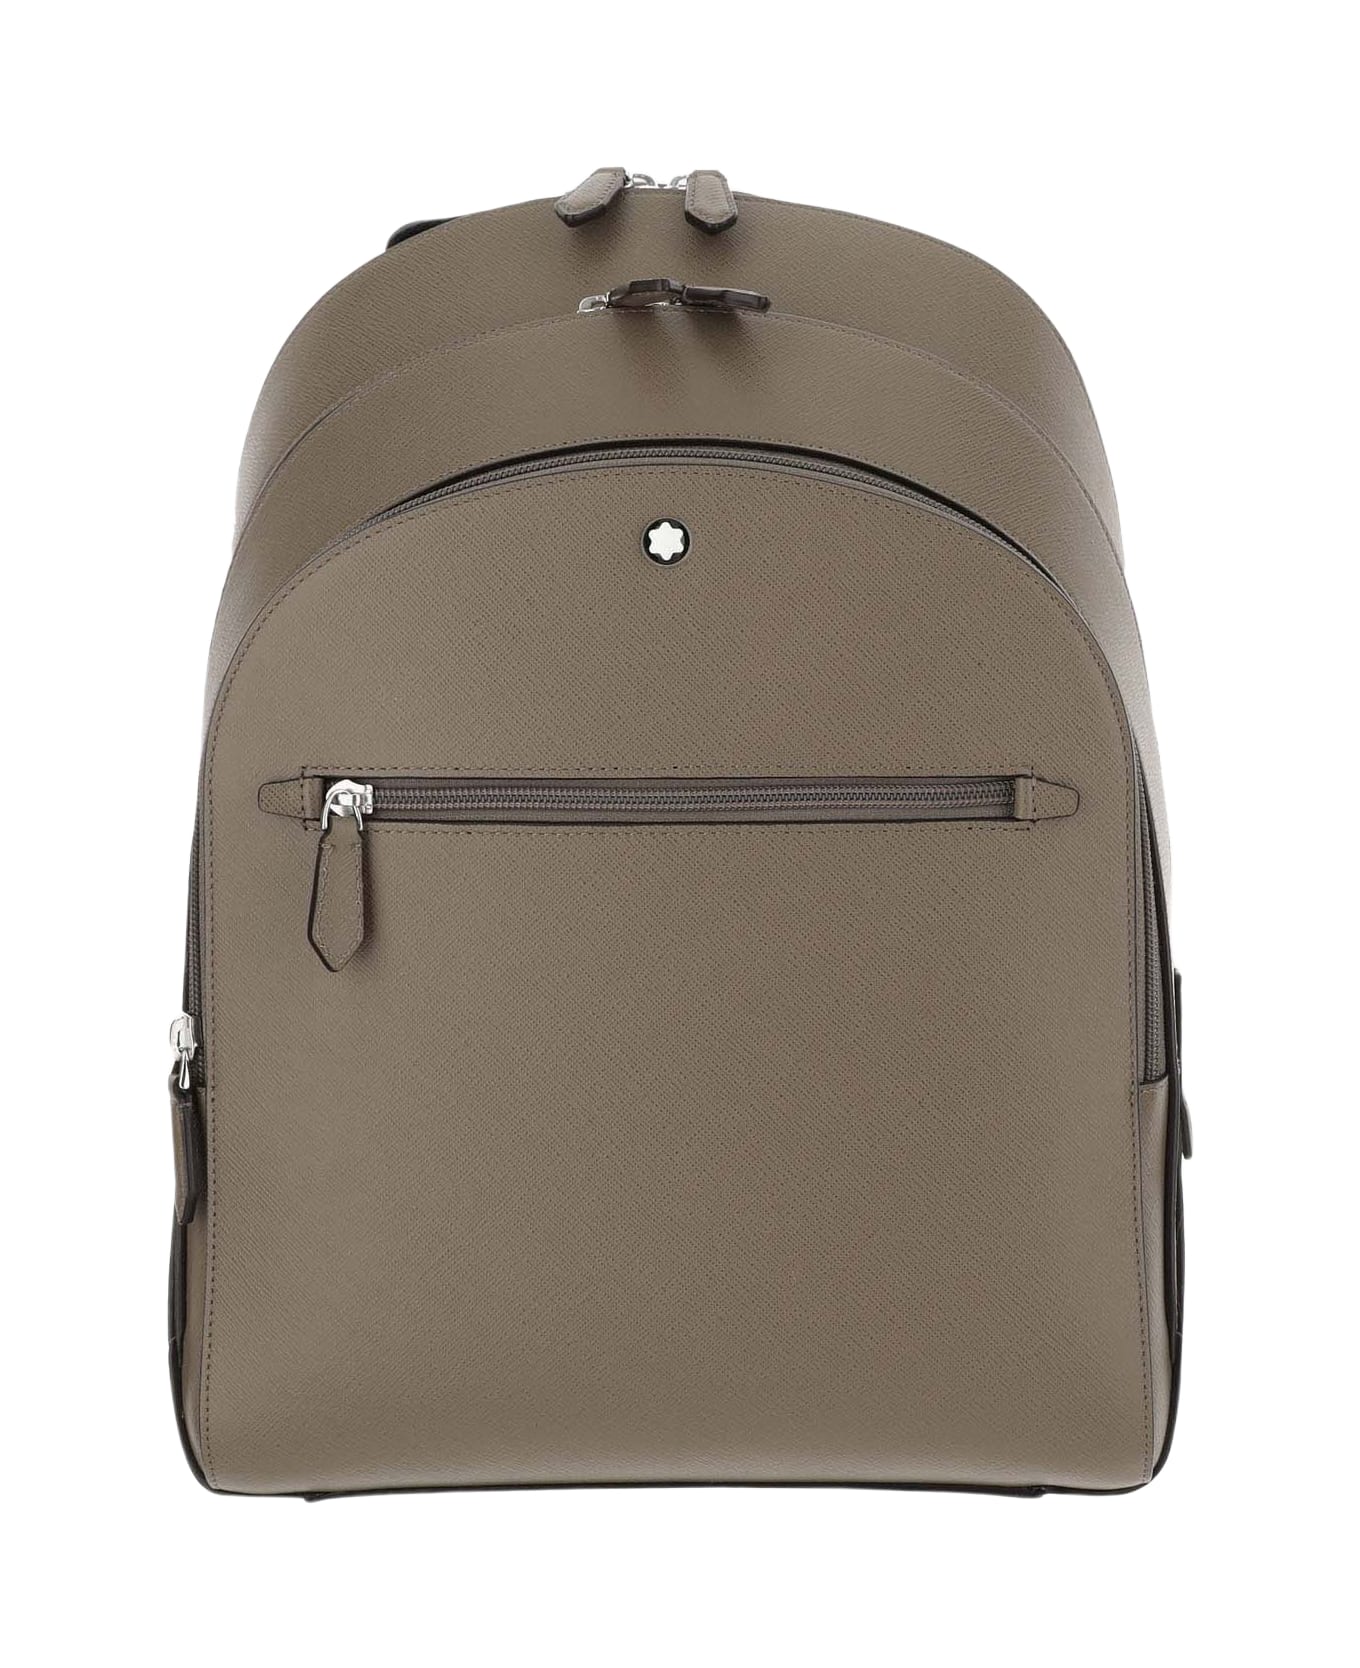 Montblanc Medium Backpack With 3 Compartments Sartorial - Khaki